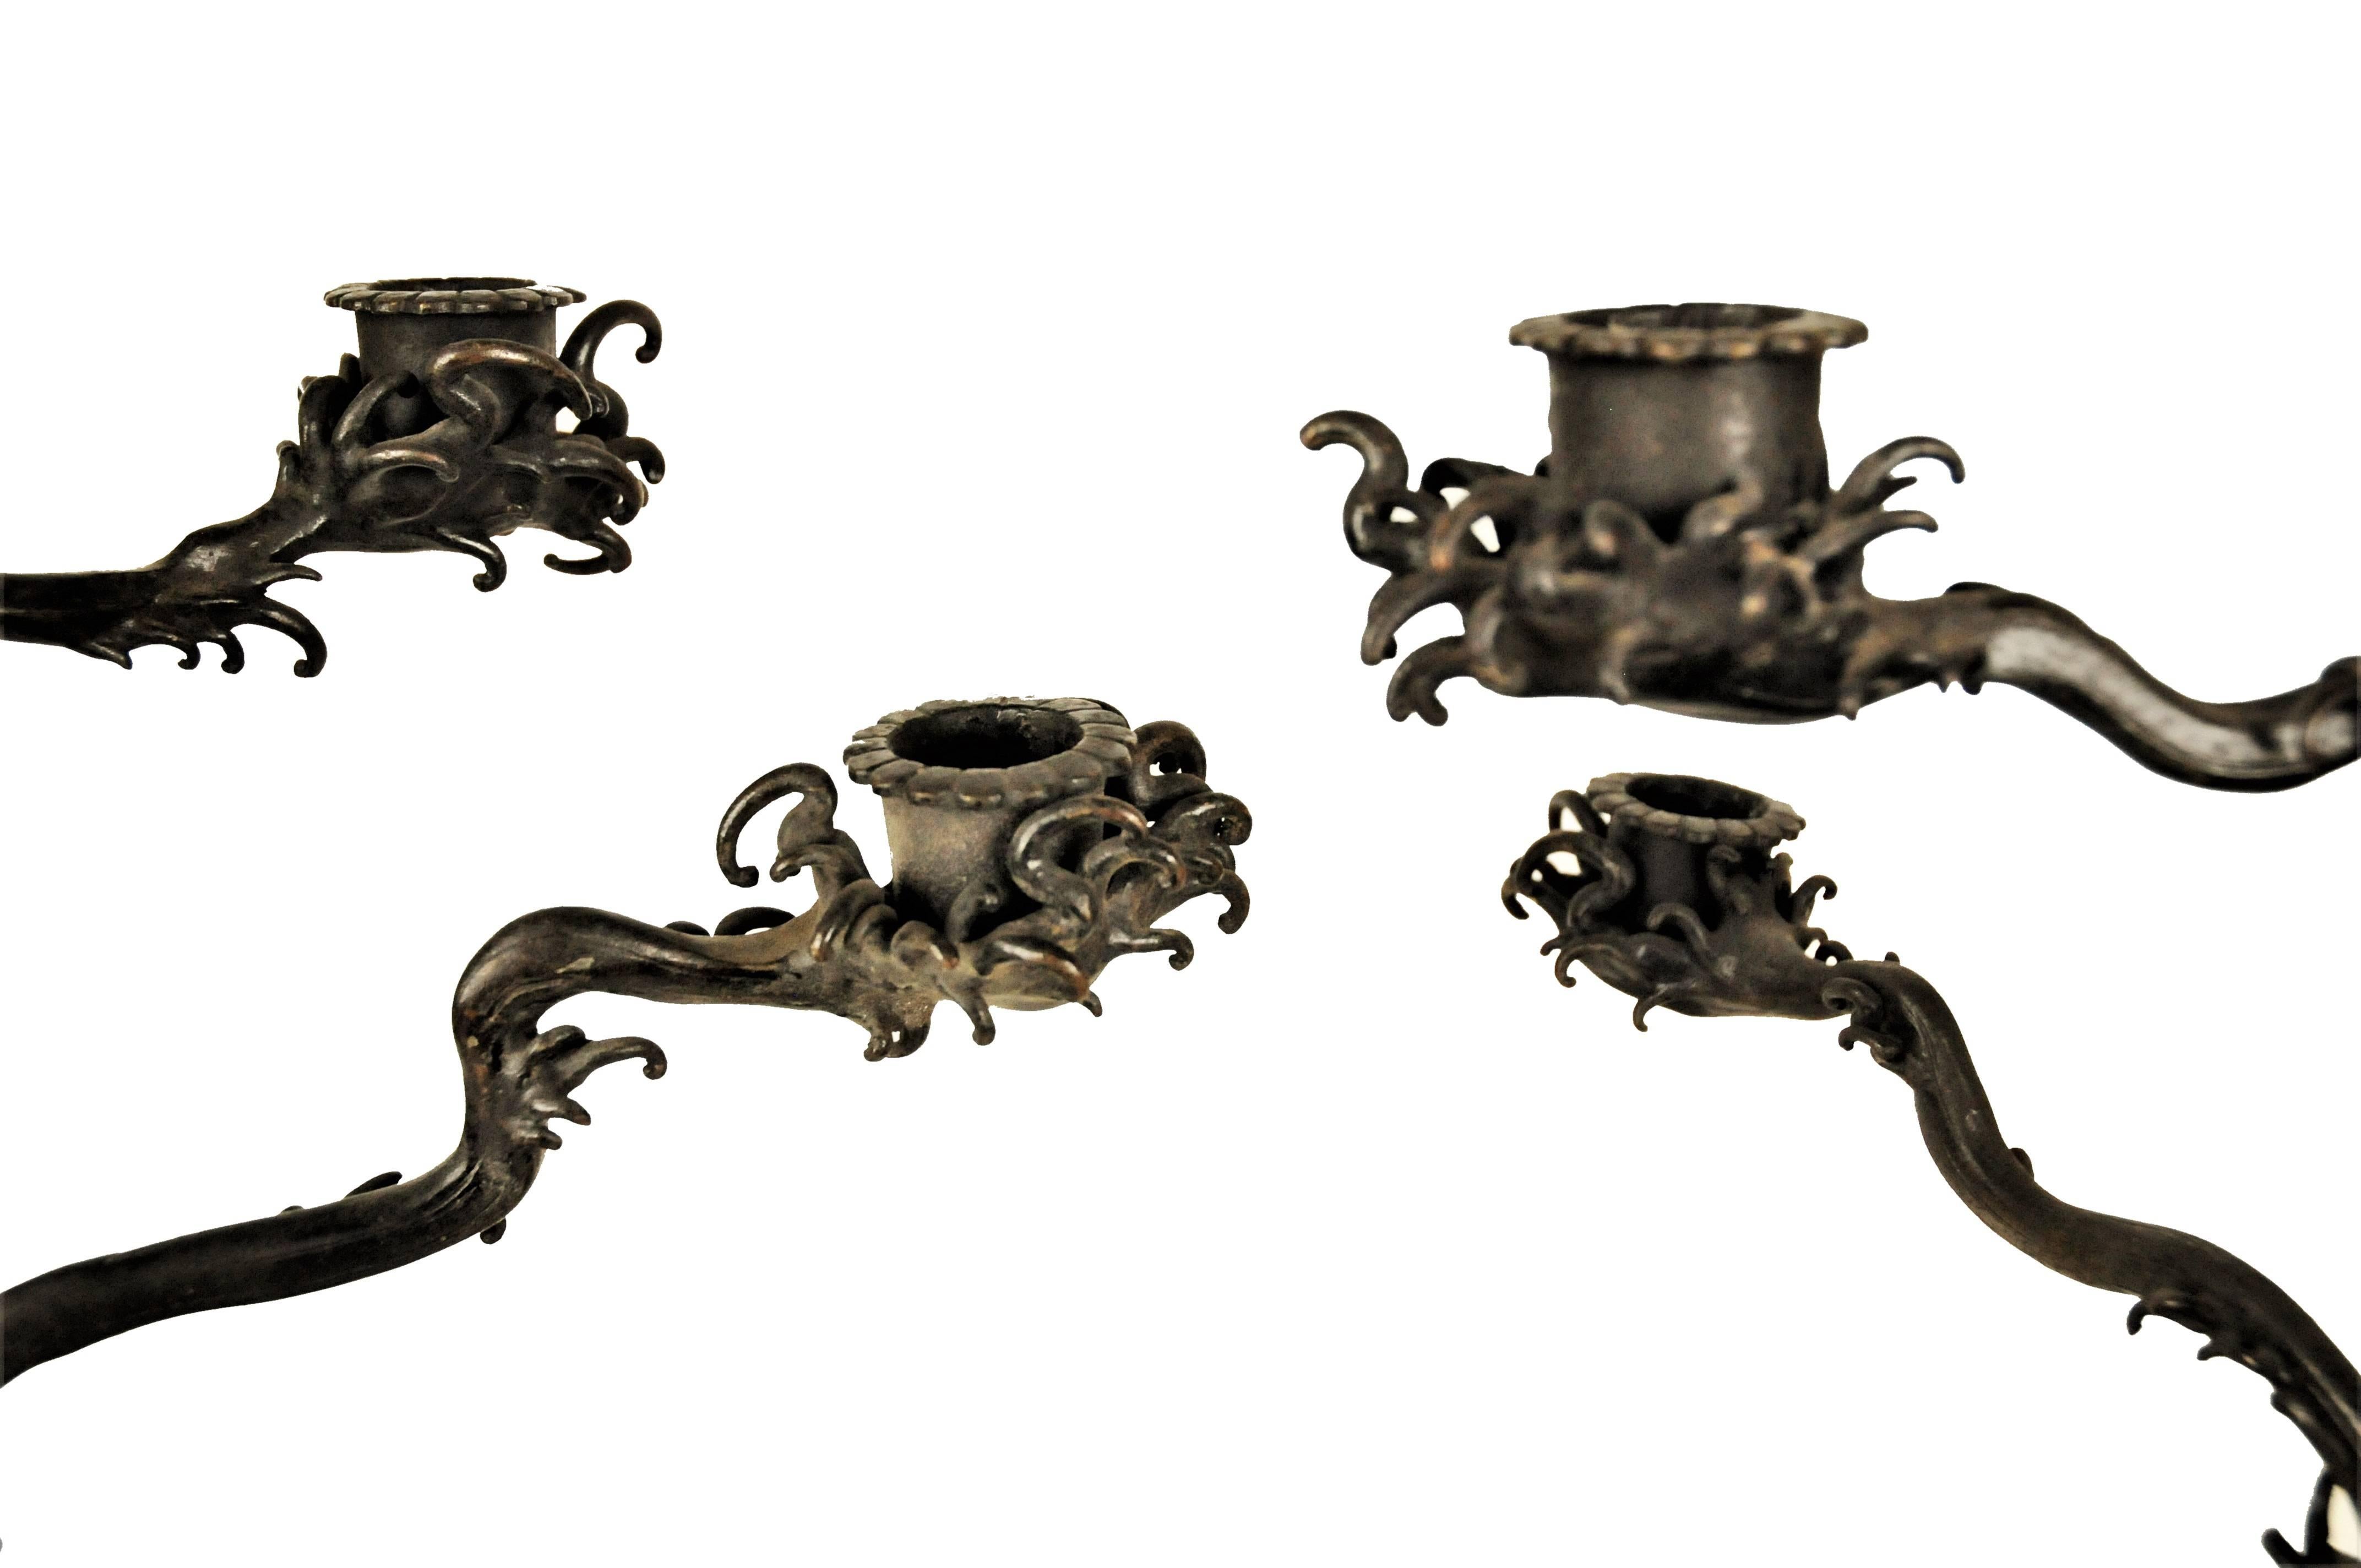 Pair of Japanese Patinated Bronze Candelabras, Meiji Period, ca. 1900 For Sale 3